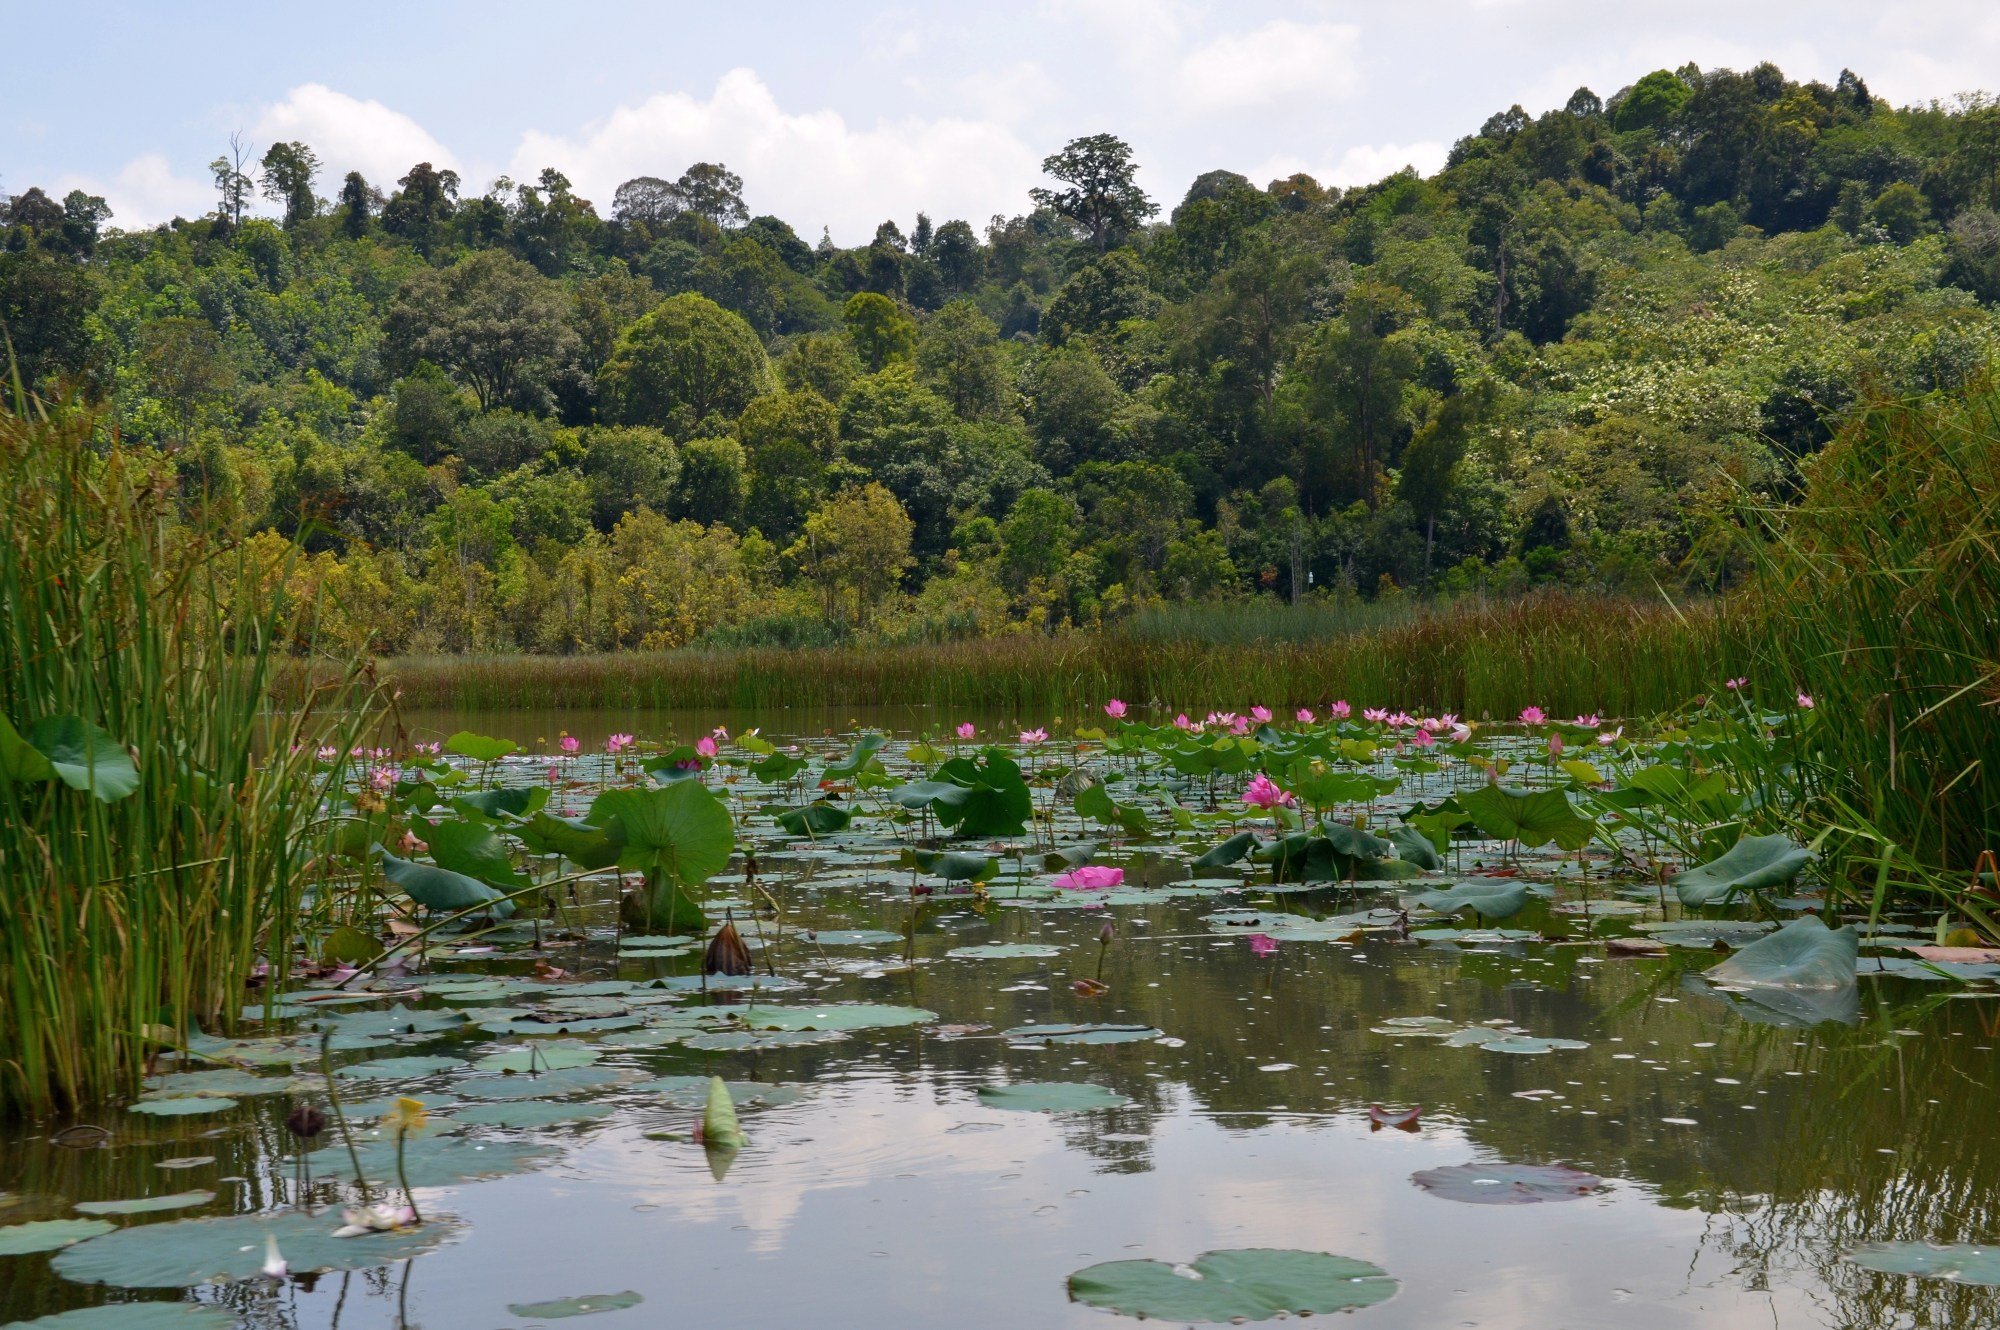 The lake used to be ‘so full of lilies that there were only paths for the boats’, but few remain nowadays. Photo: Shutterstock